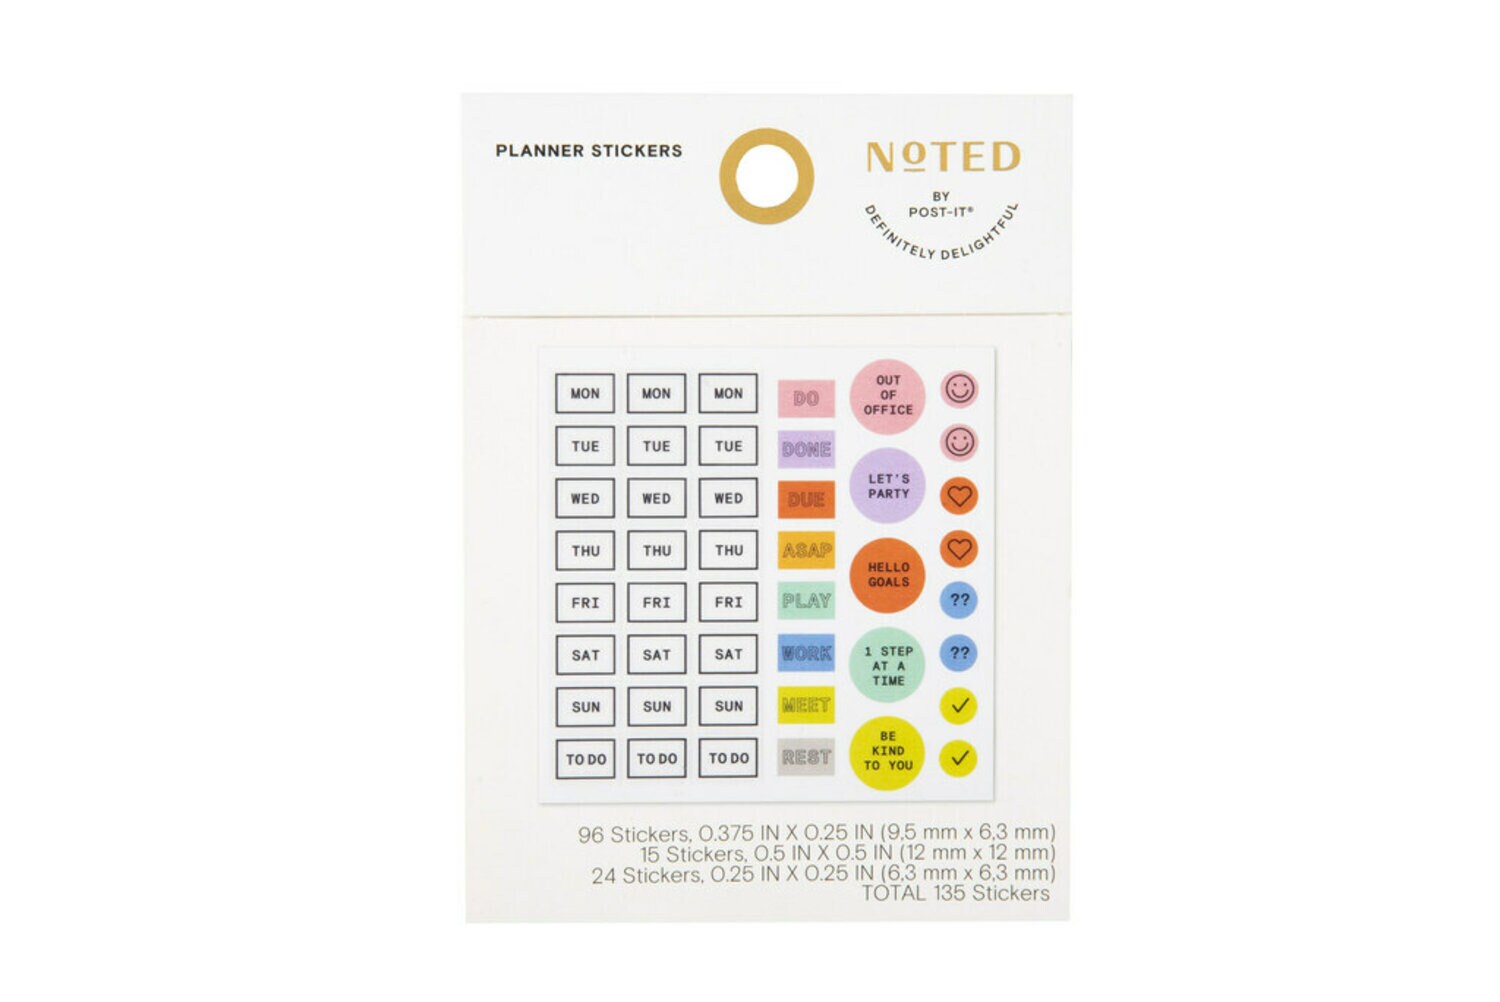 7100265099 - Post-it Planner Stickers NTD5-PS2, 3 sheets, 45 stickers/sheet